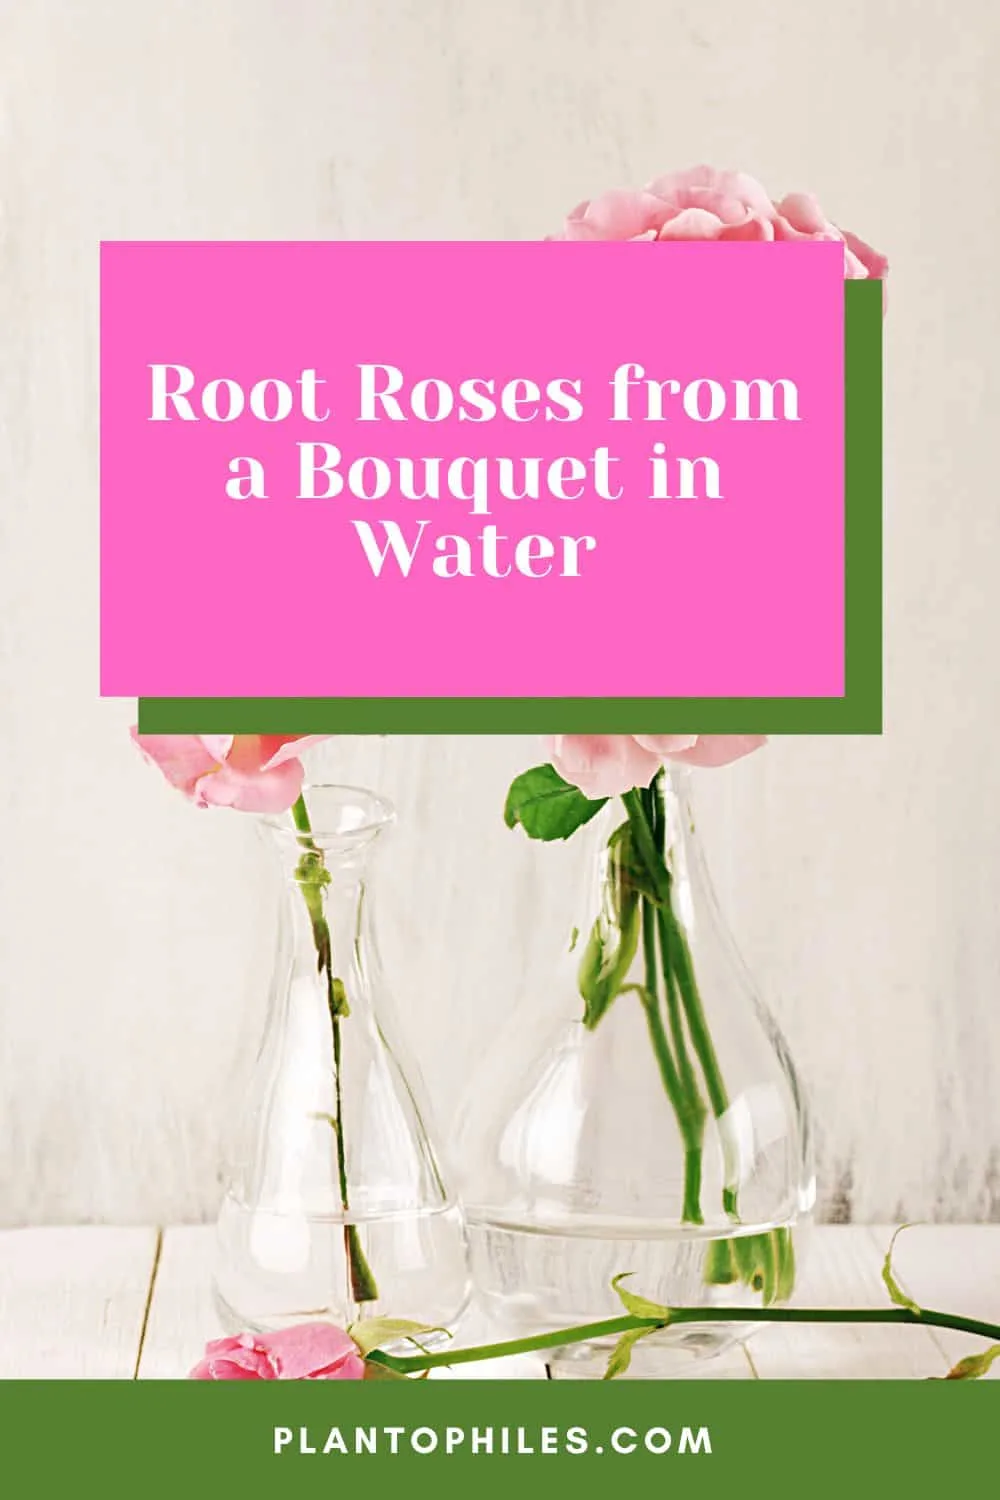 Root Roses from a Bouquet in Water